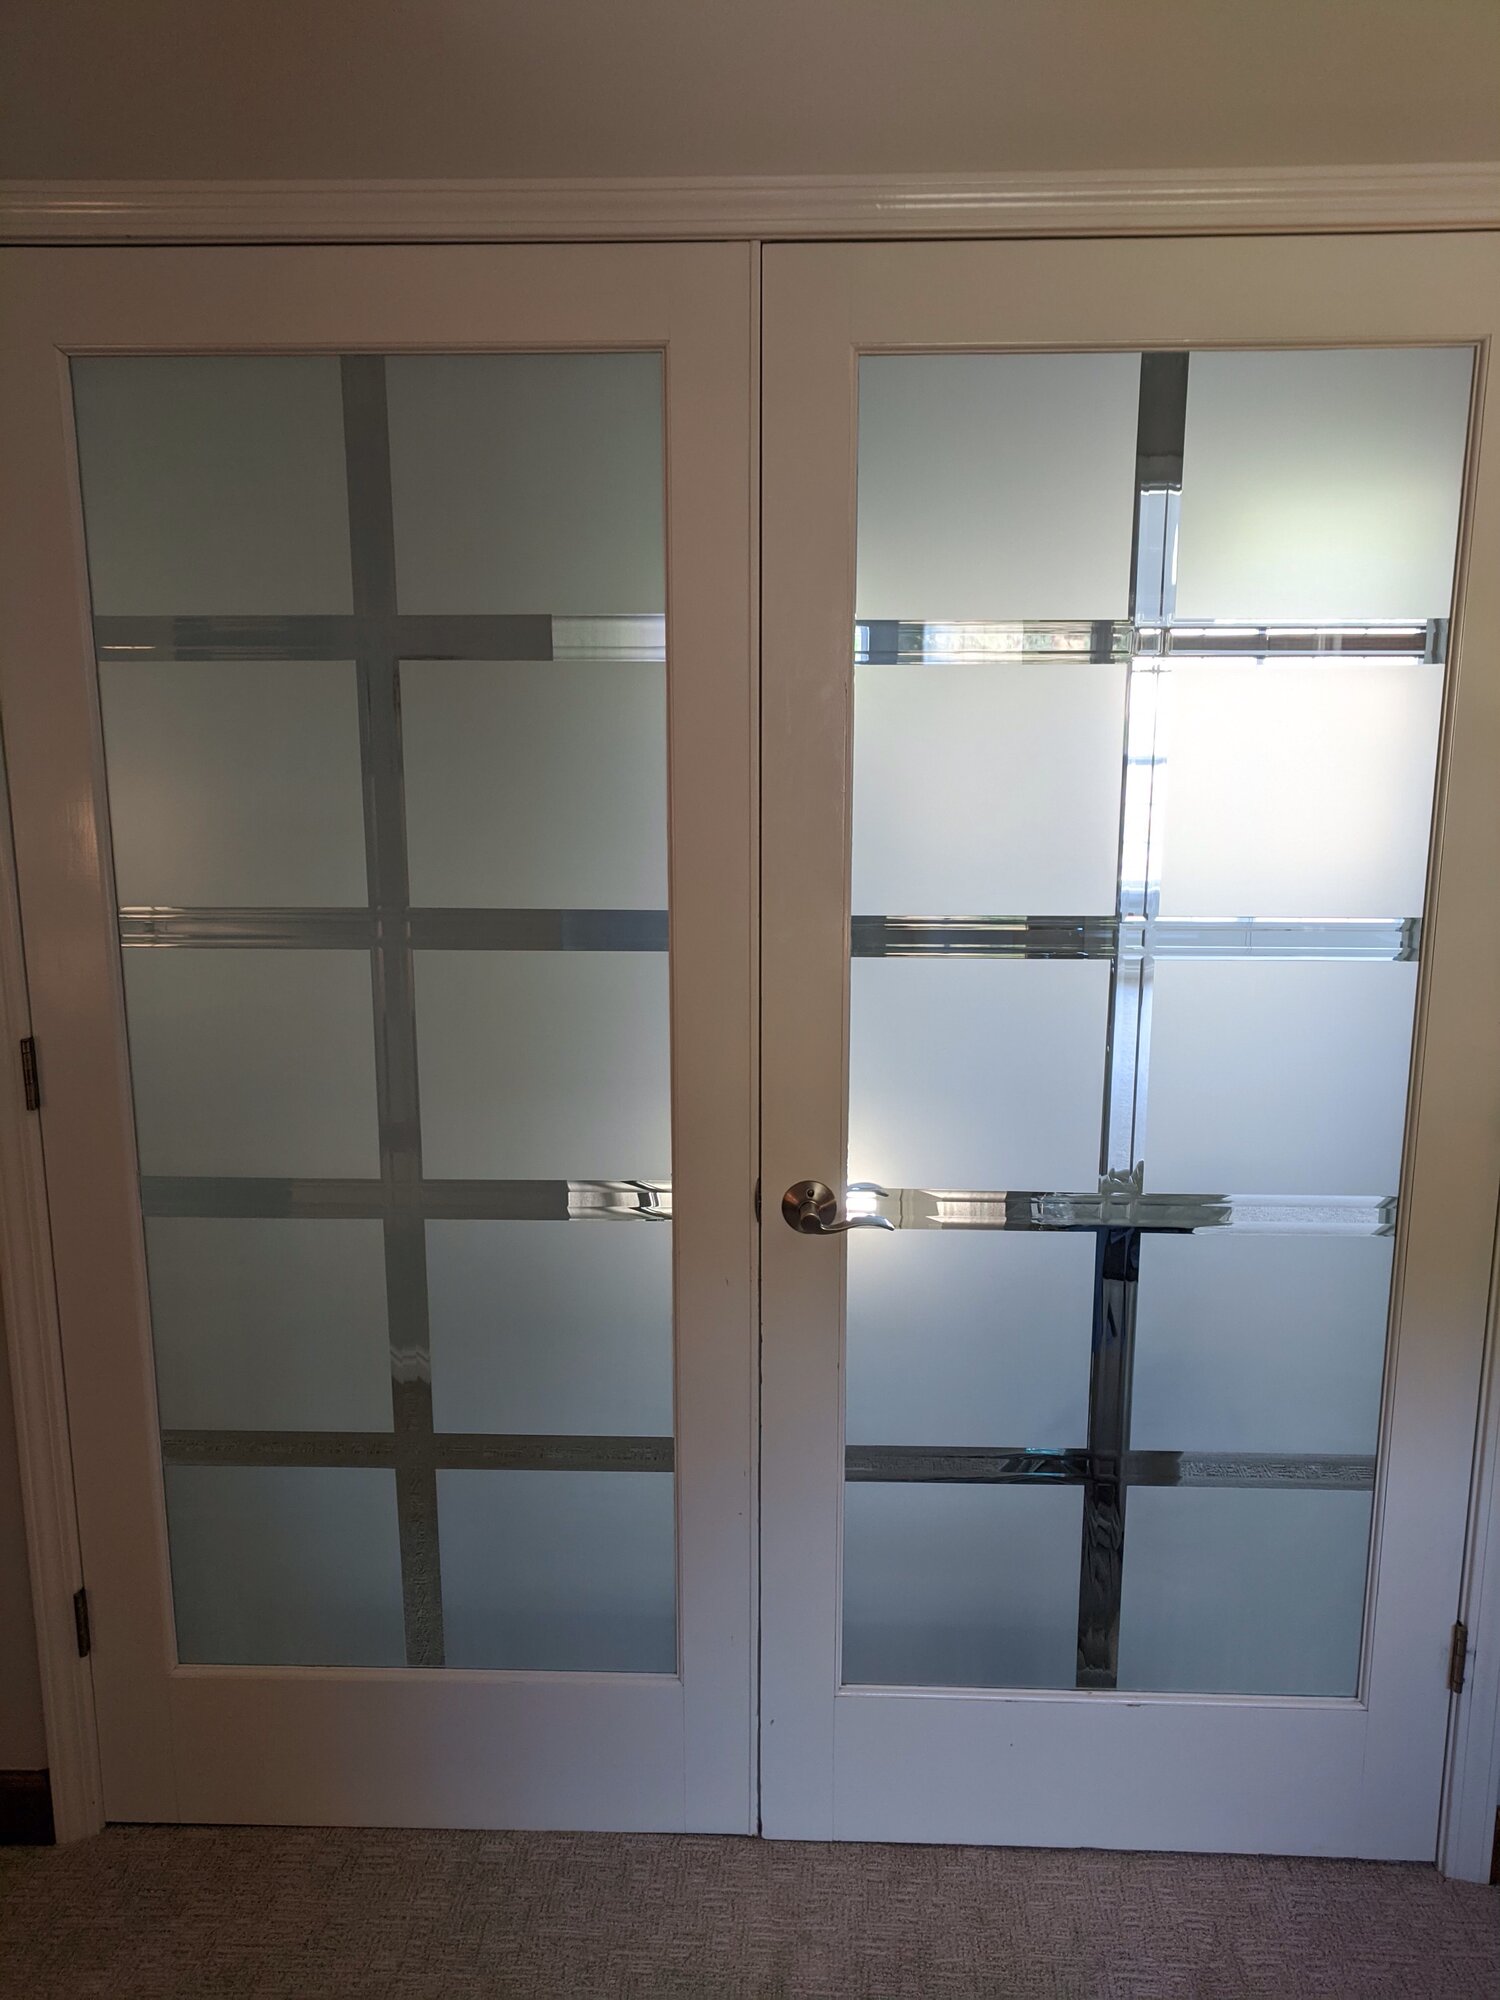 Decorative Window Film for Home and Office Doors and Windows